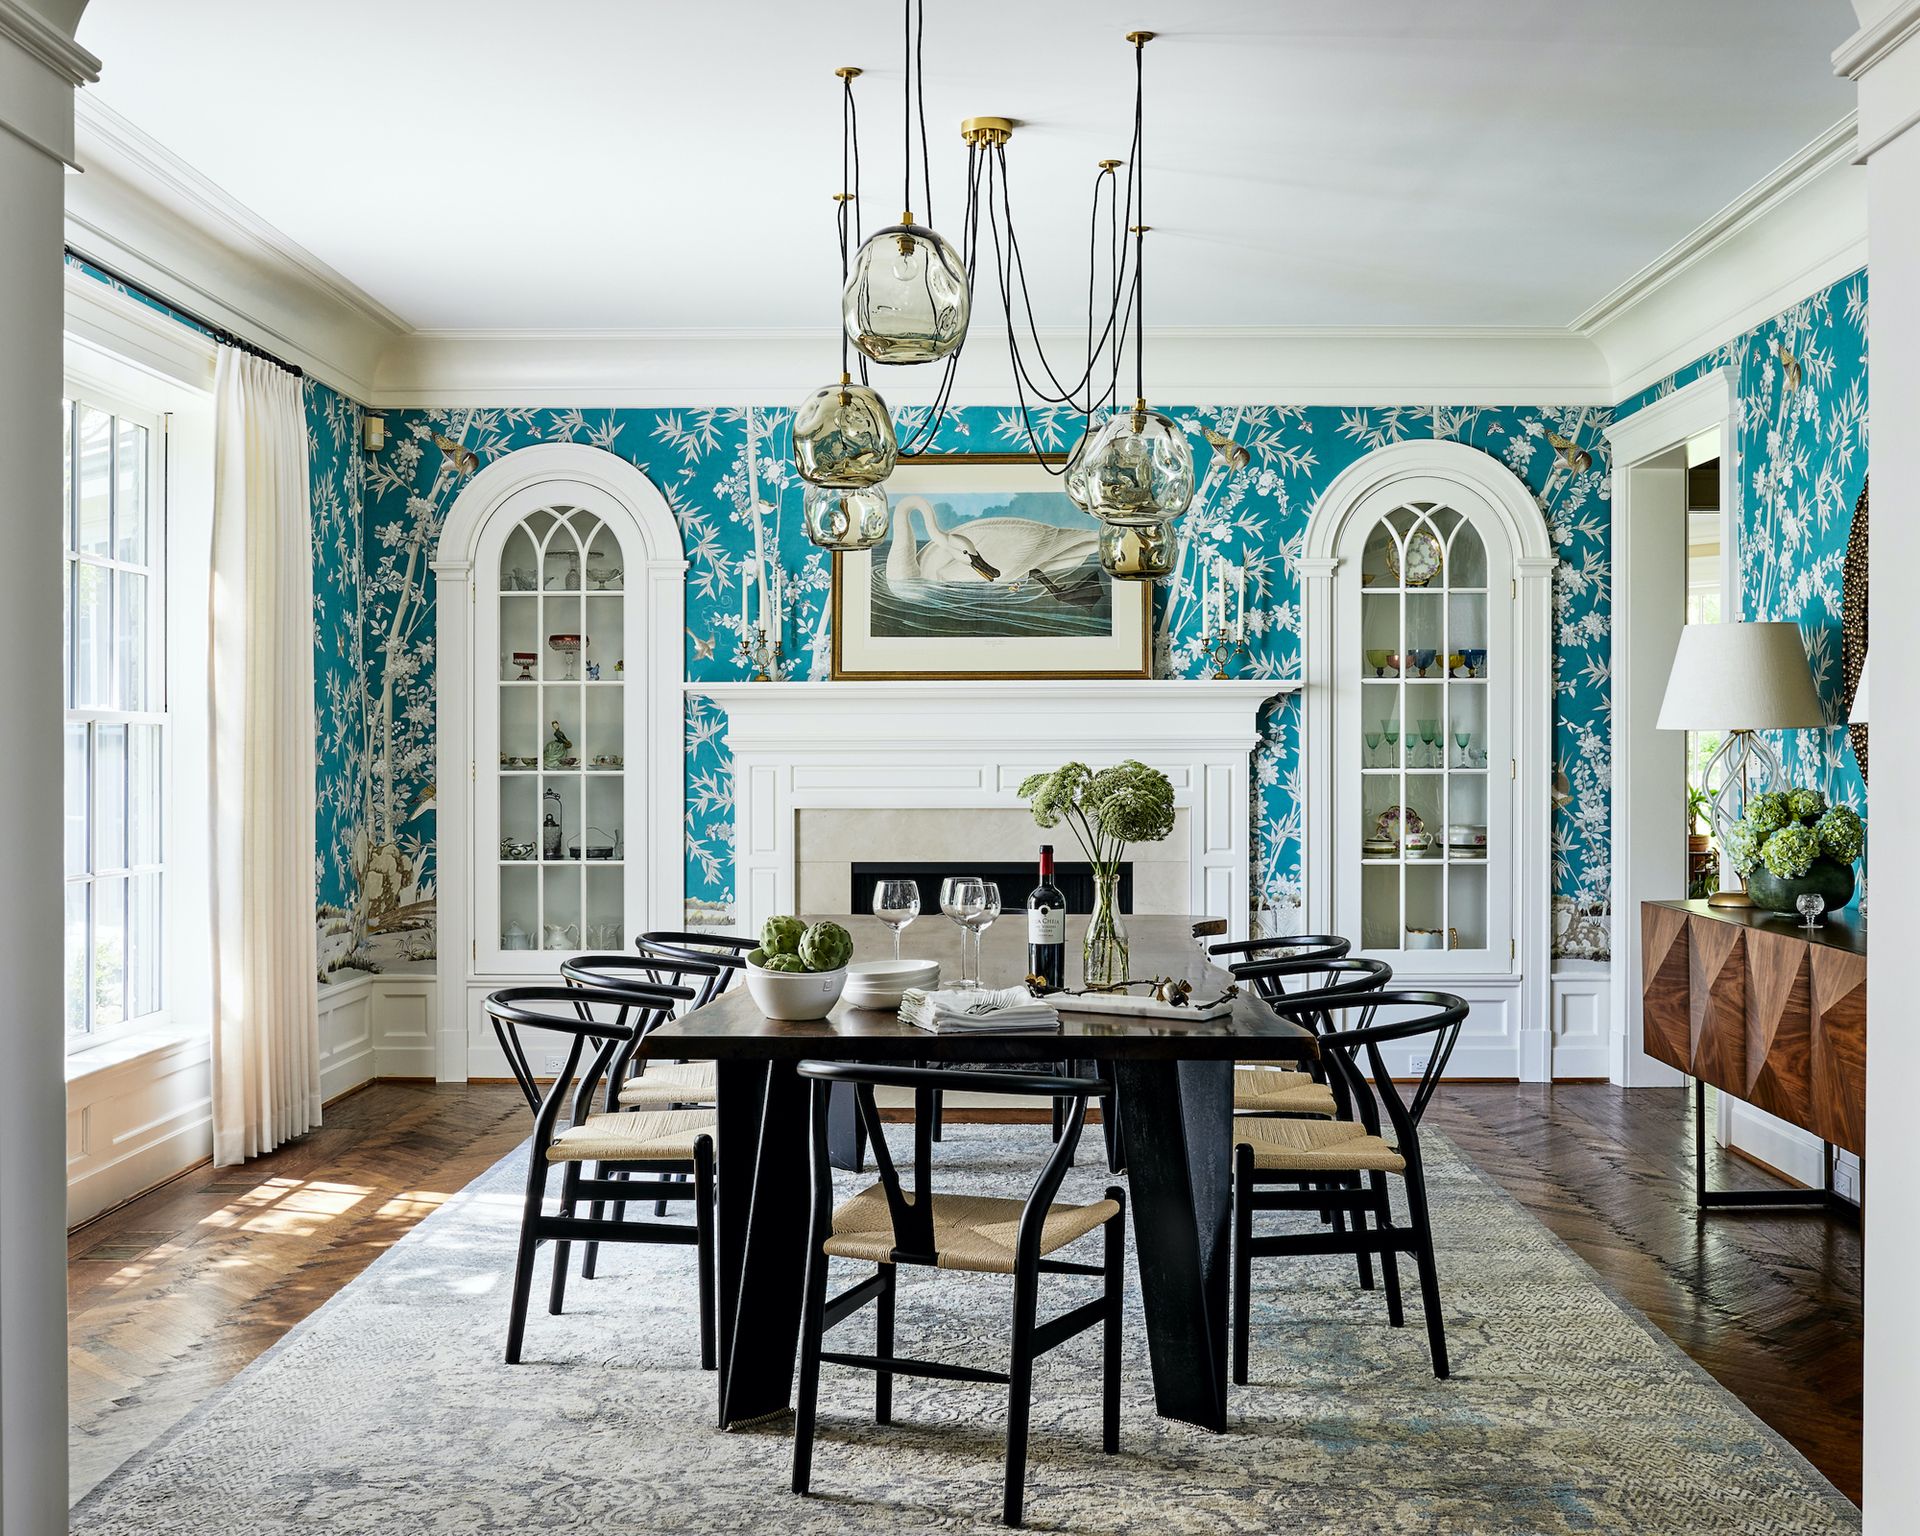 A Virginia home with its own arboretum gets a stylish update | Homes ...